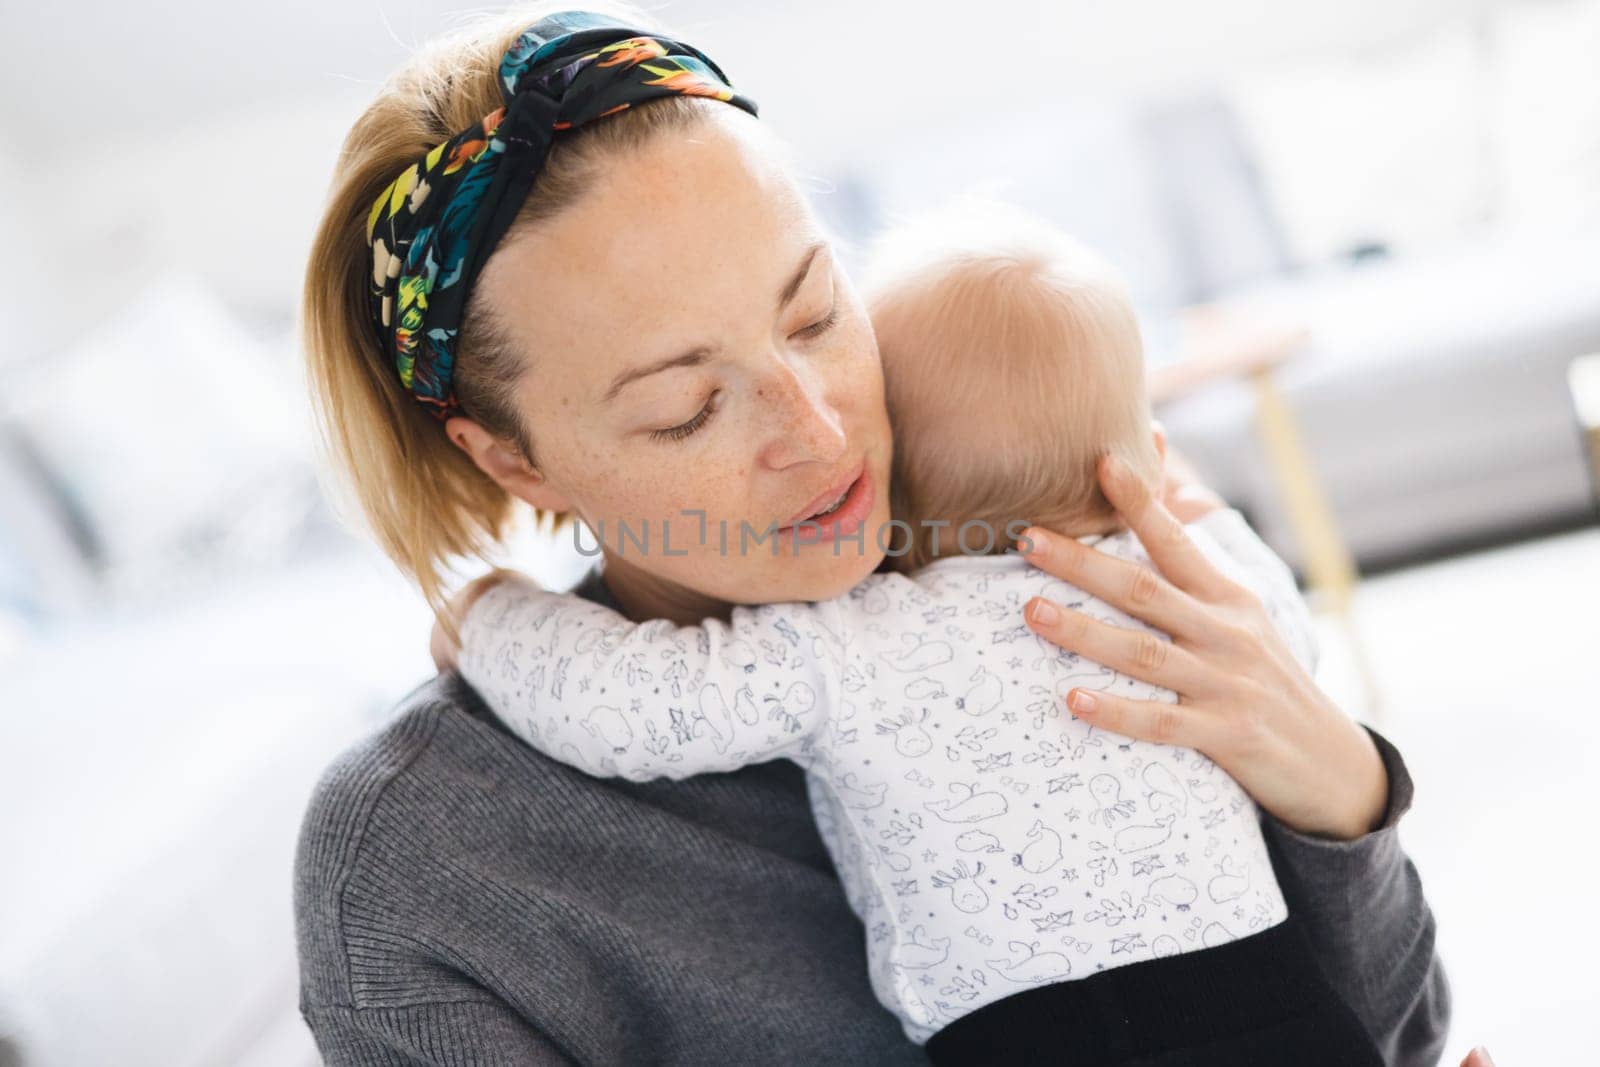 Tender woman caressing her little baby boy infant child at home. Mother's unconditional love for her child by kasto